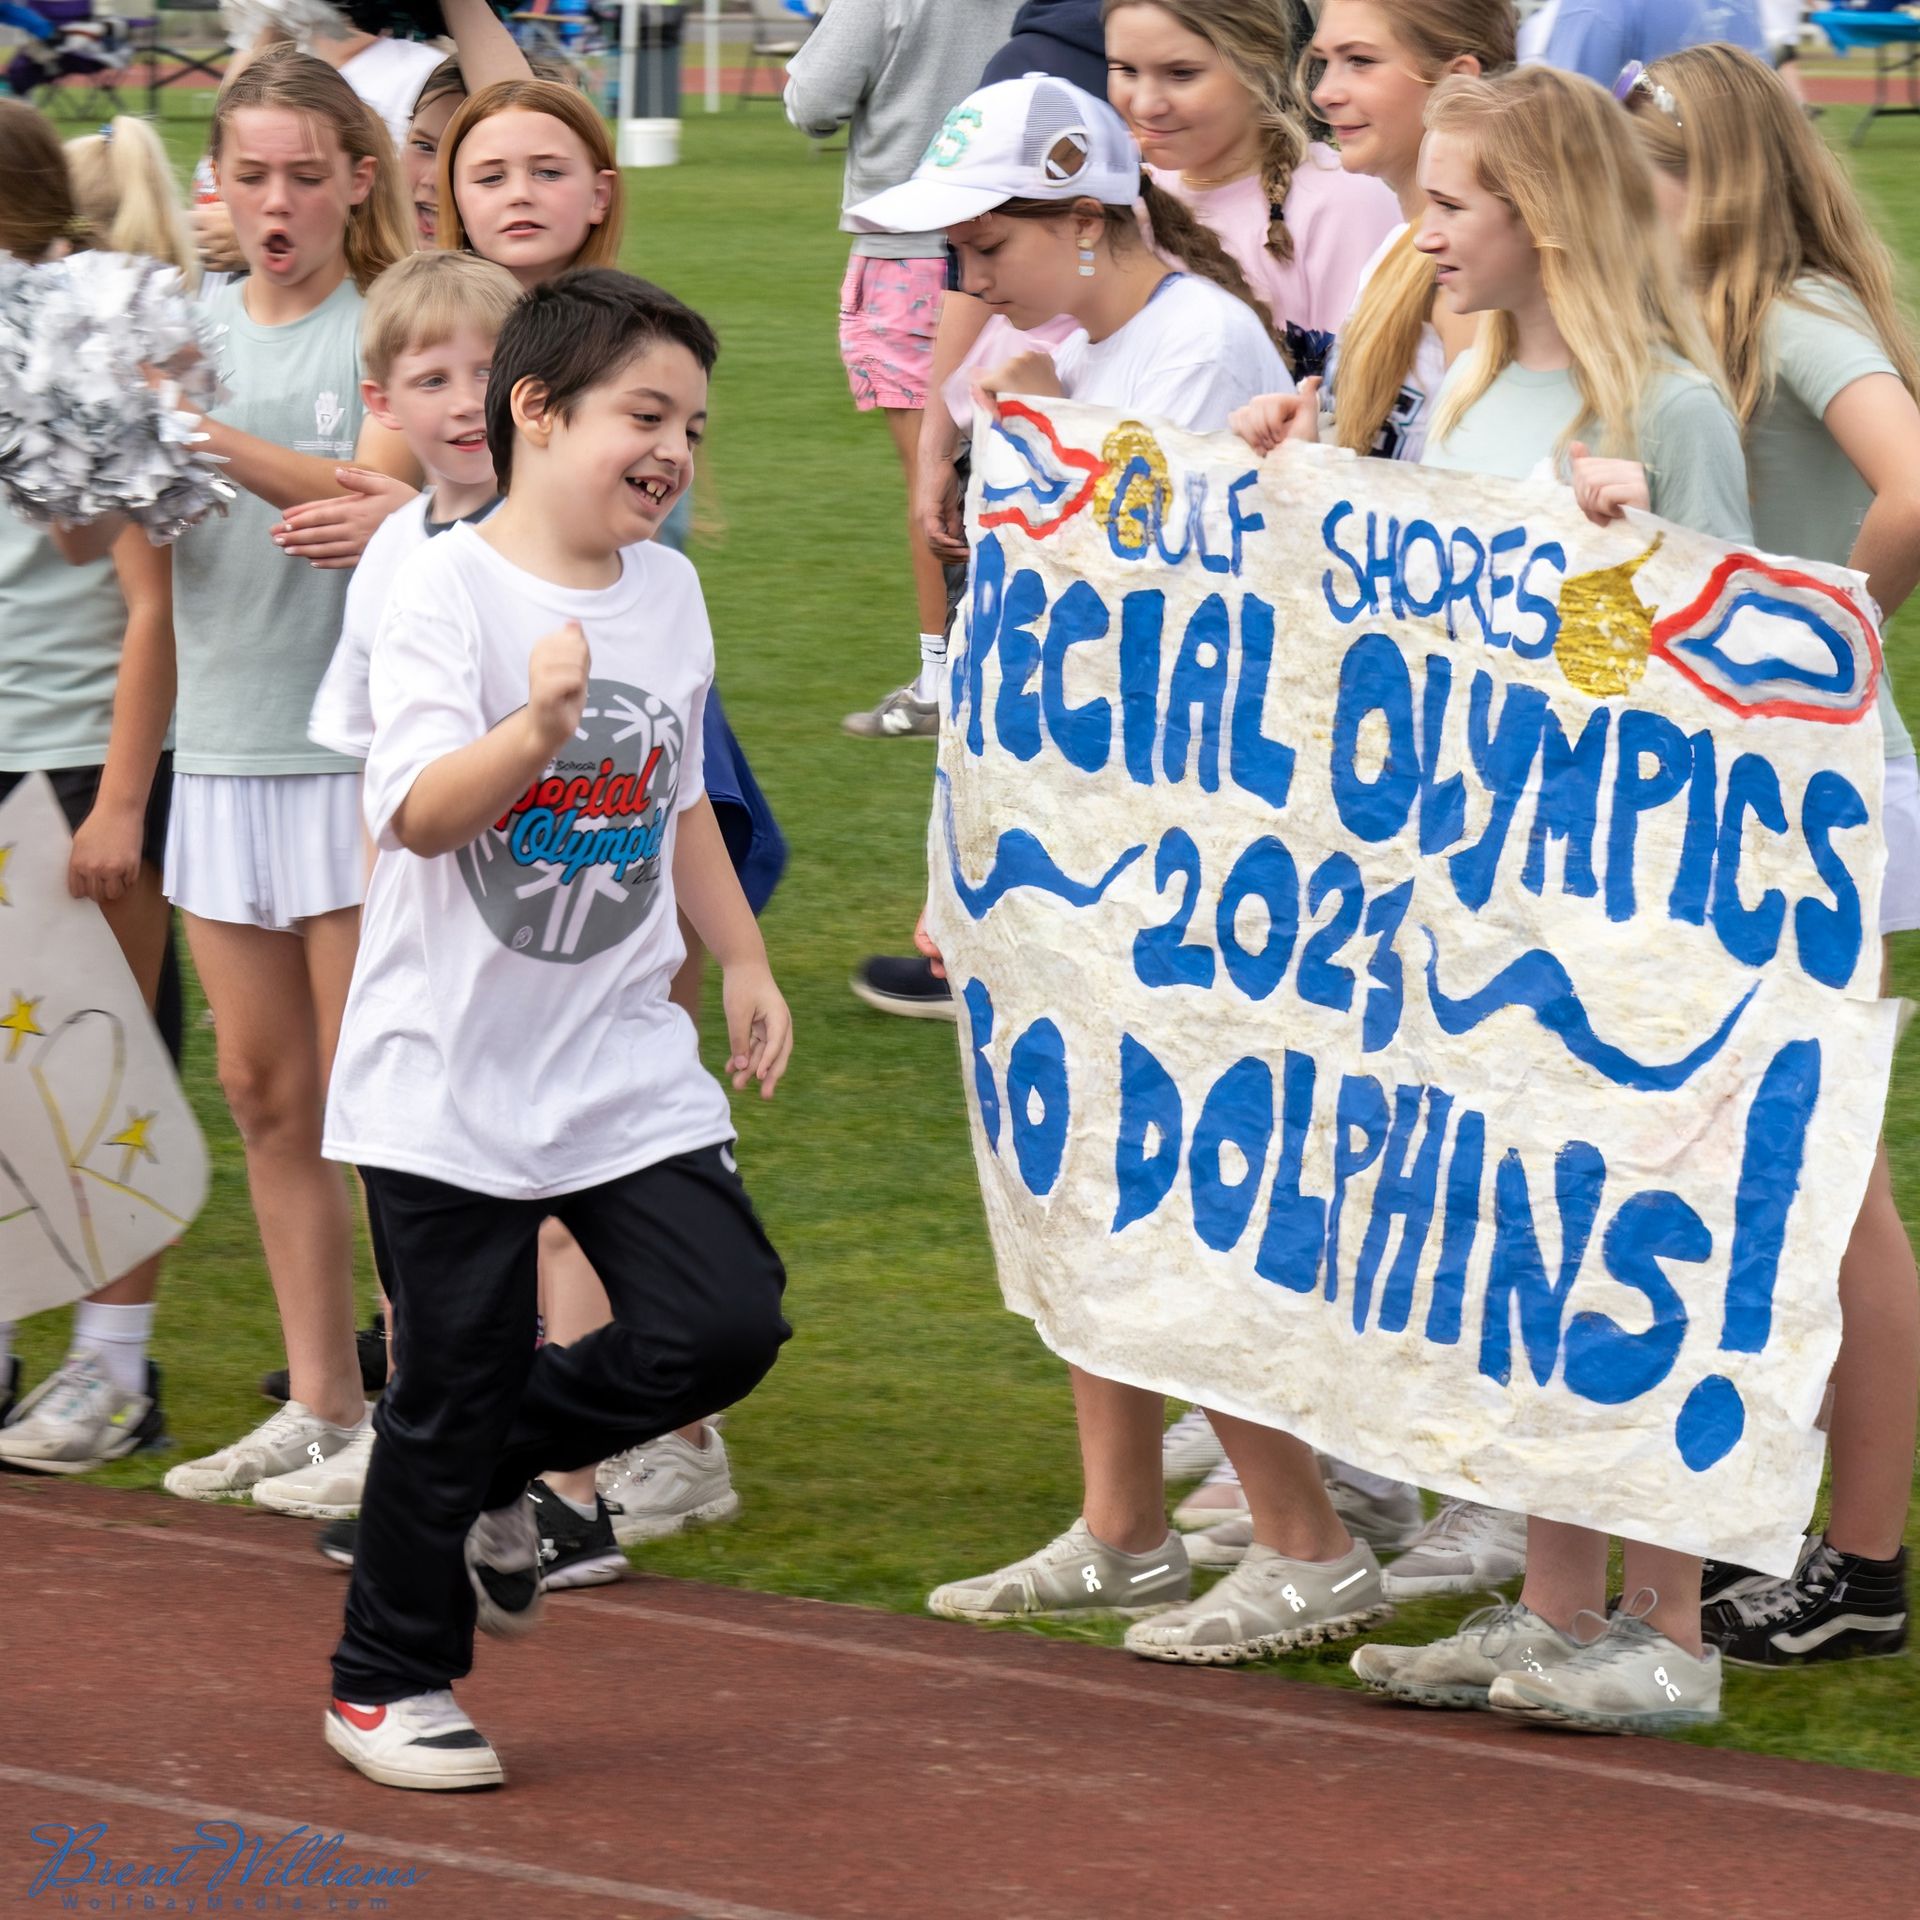 Special Olympics 2023 in Gulf Shores, Photo by Brent Williams